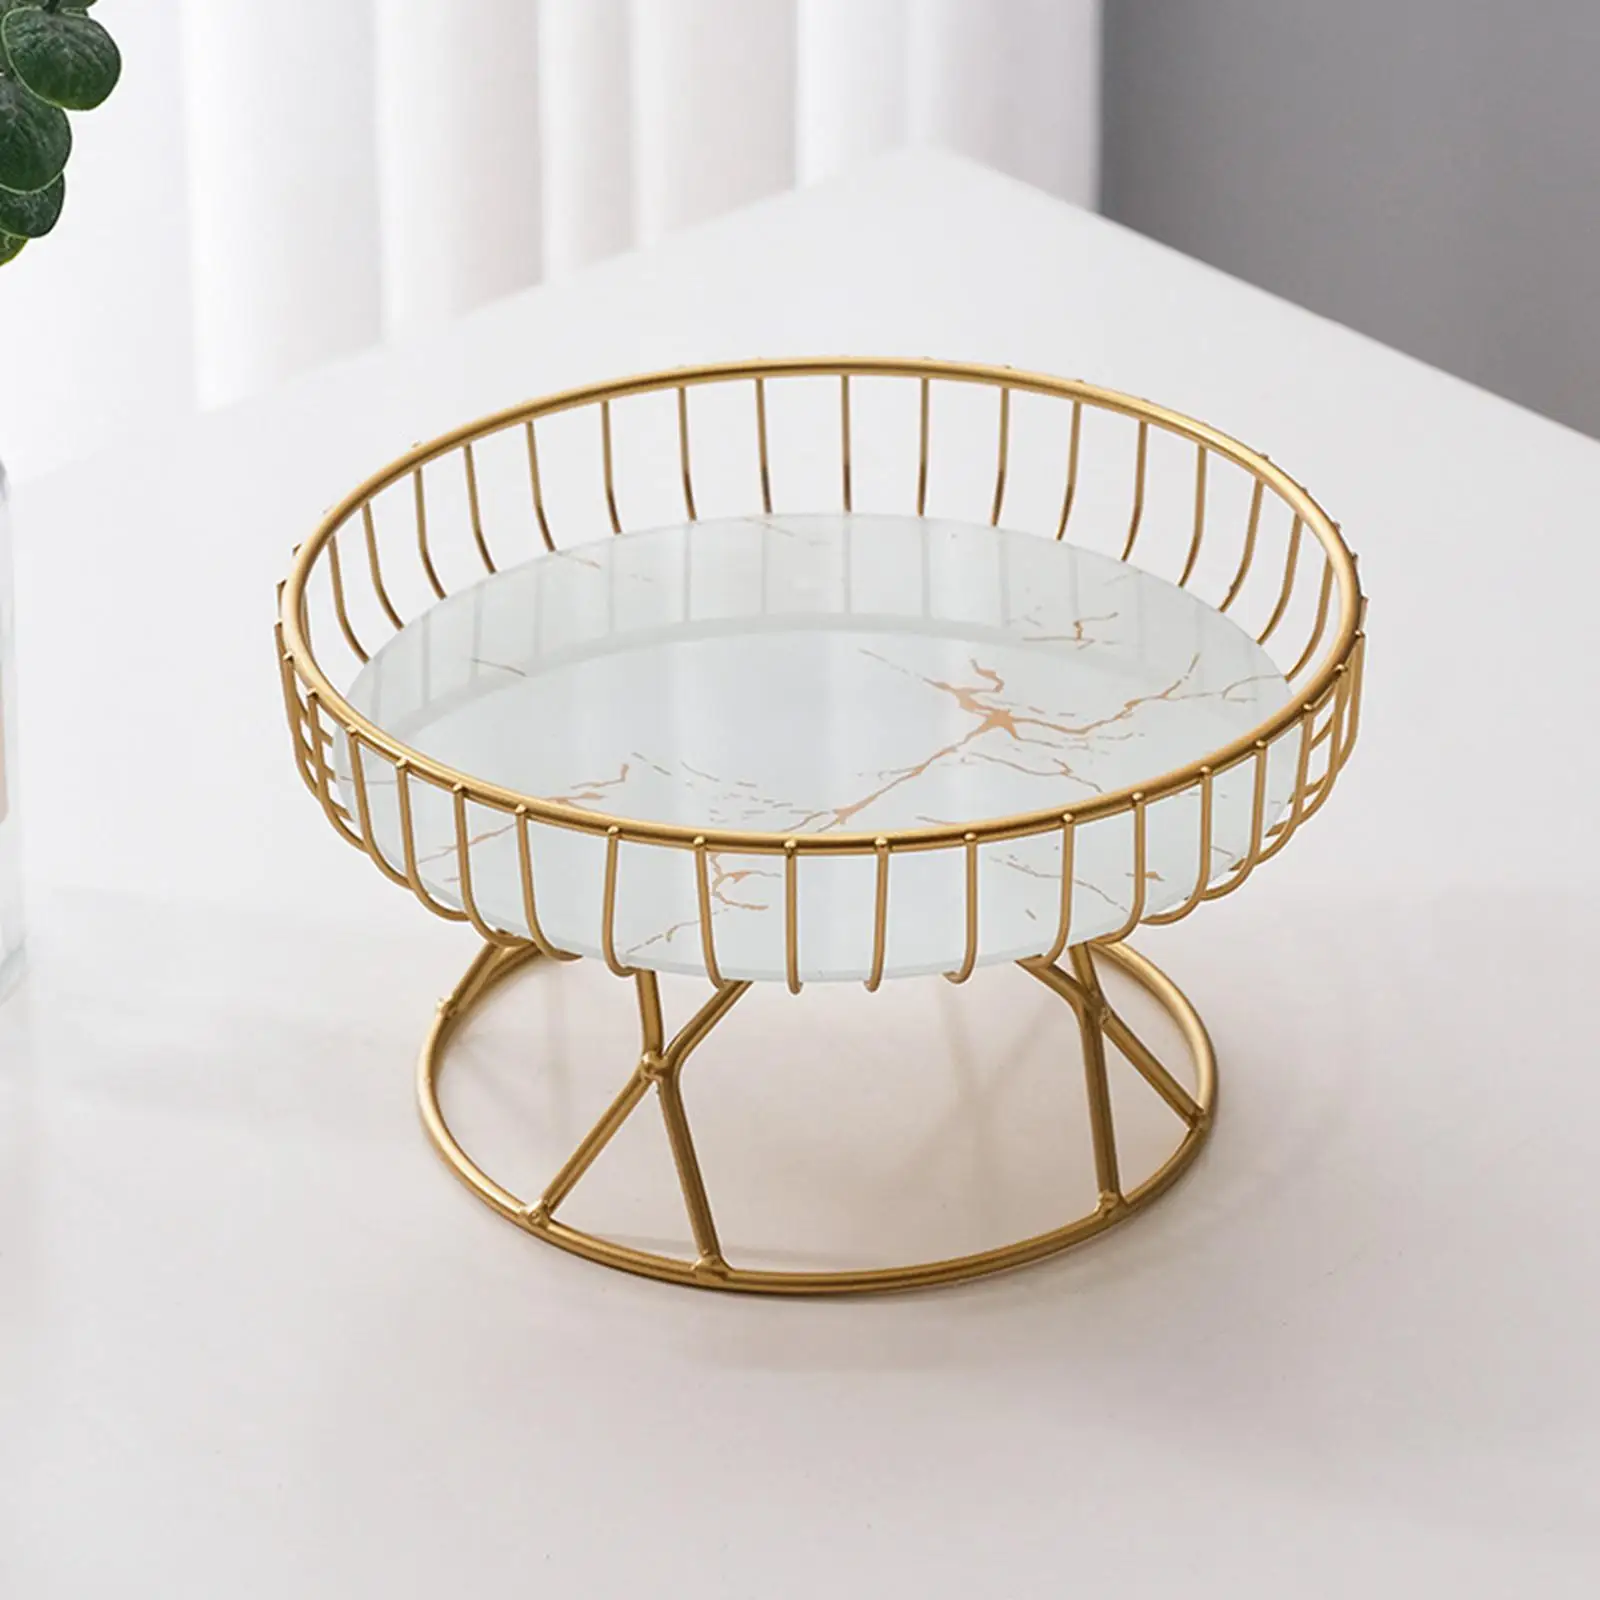 Golden Metal Iron Wire Round Fruit Basket Bowl, Storage, Display, Dry and